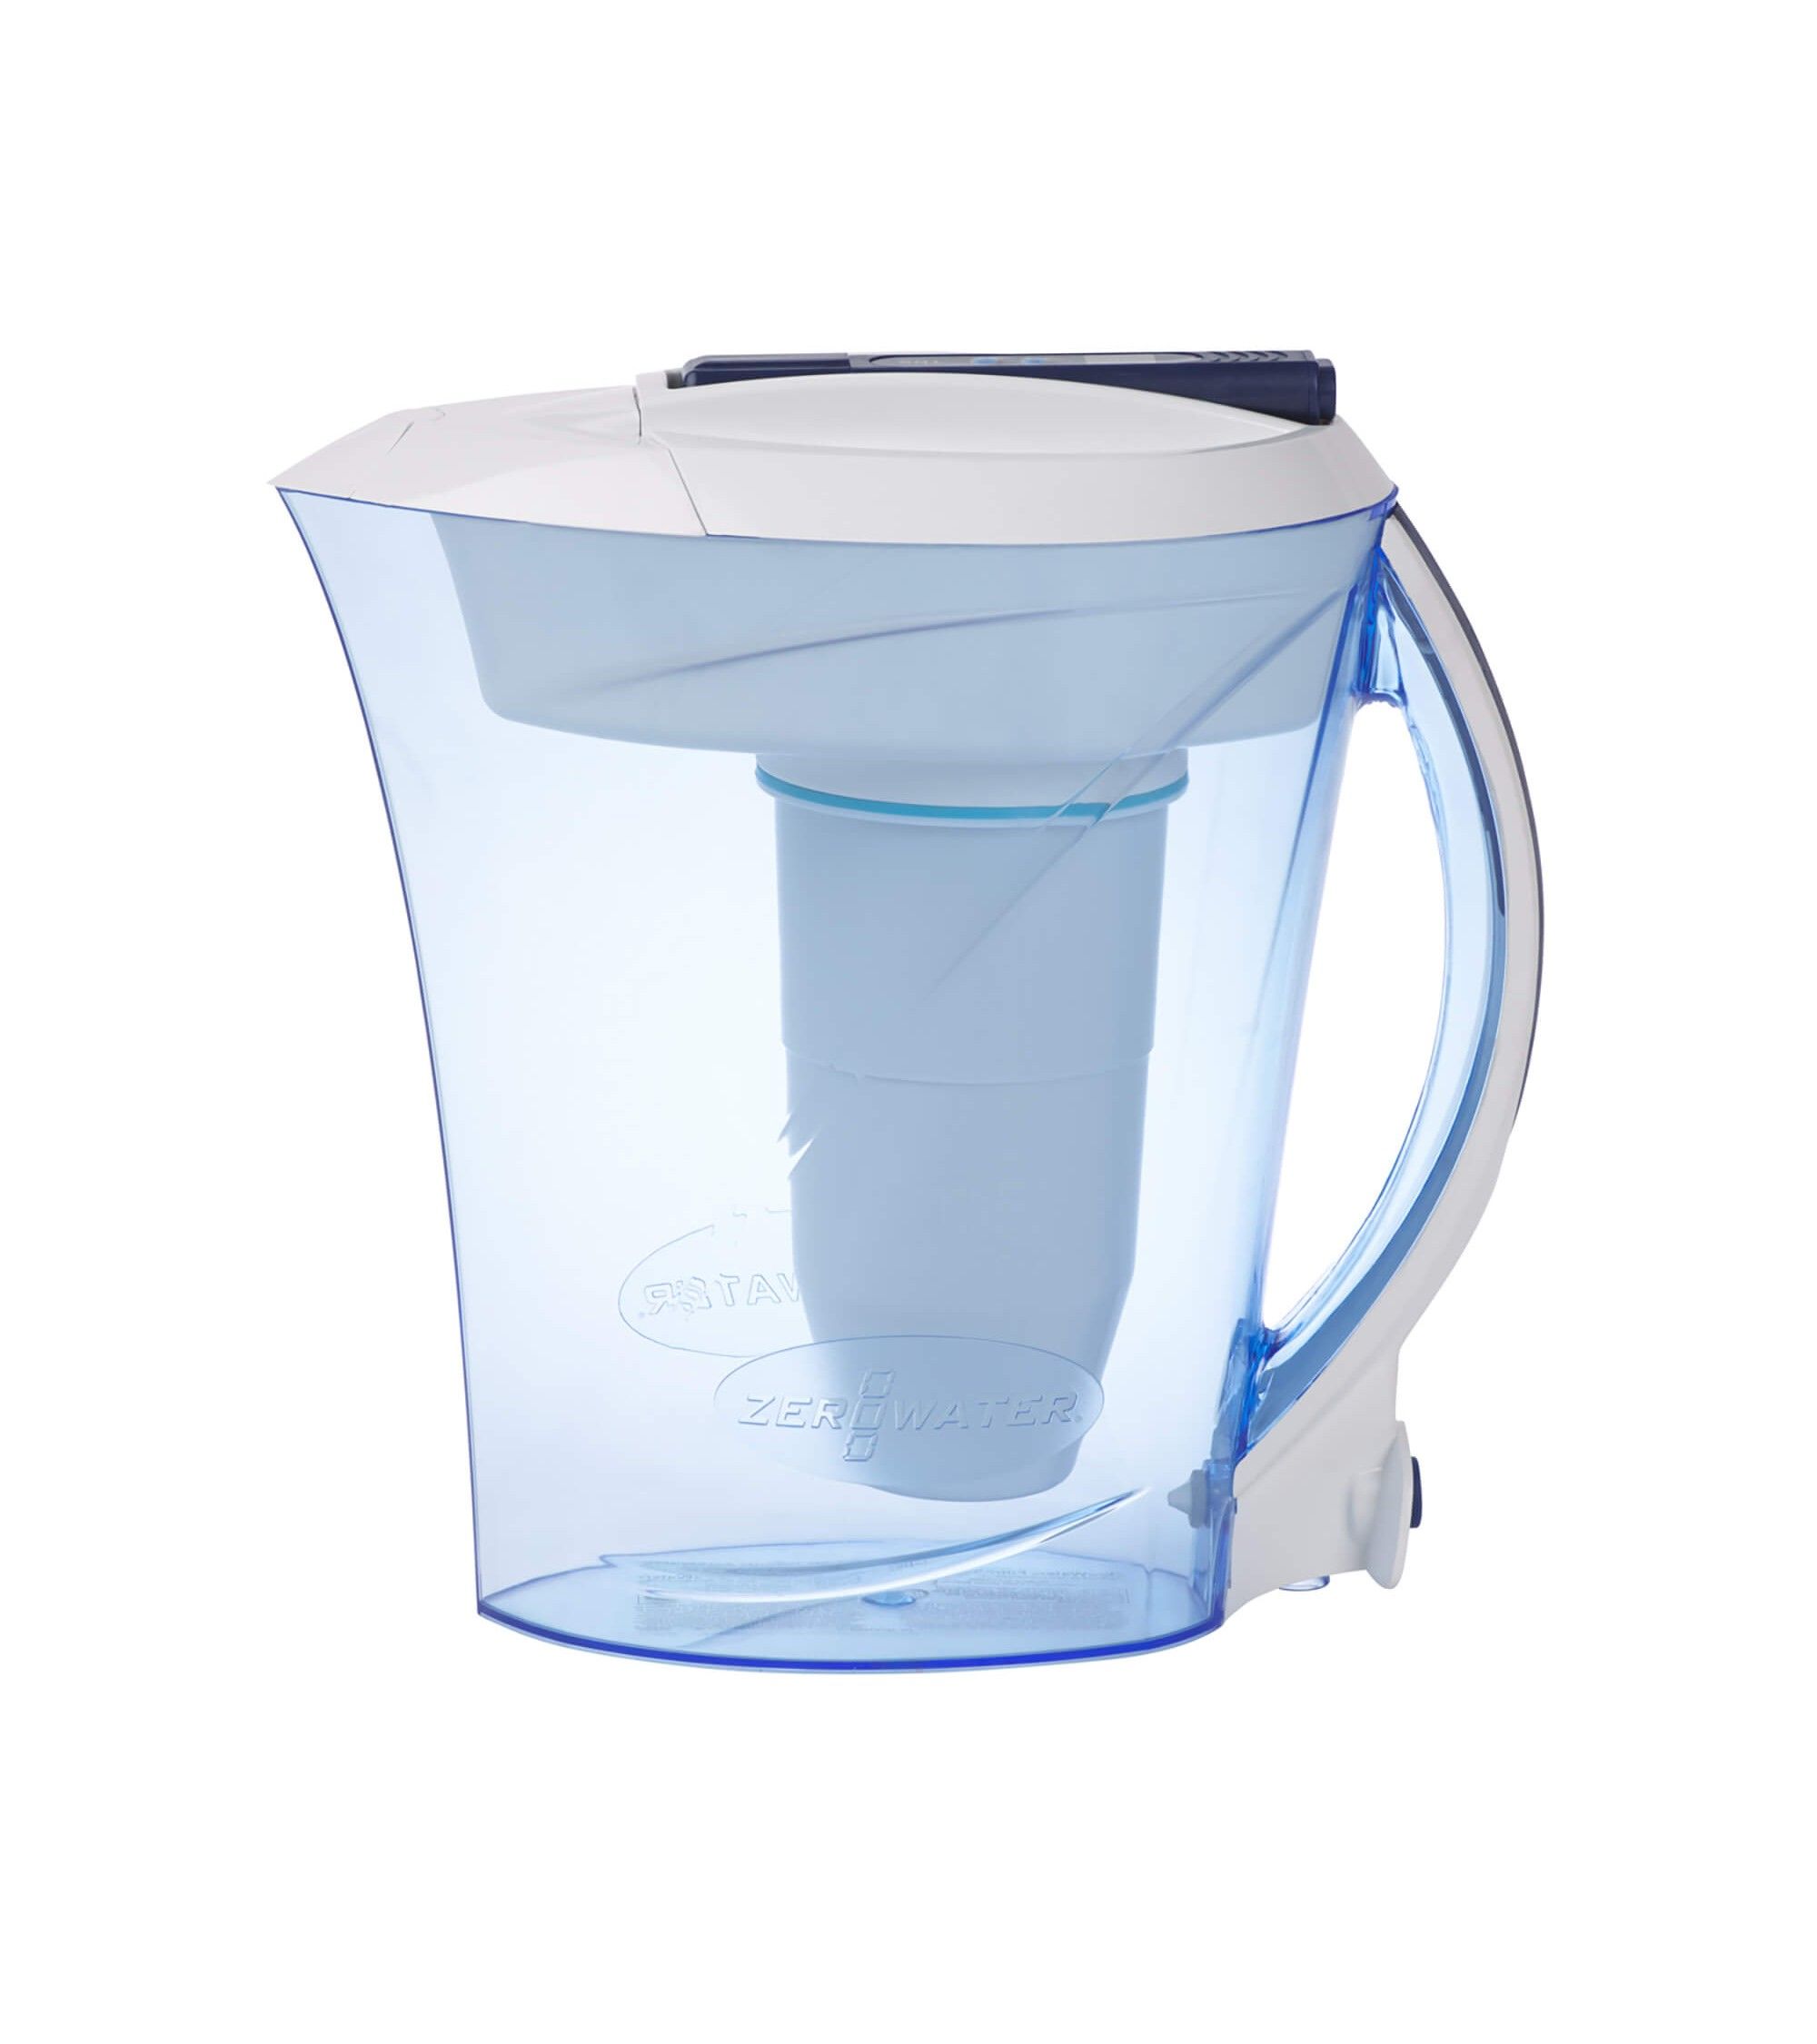 ZeroWater - ZeroWater Filter Pitcher, 10 Cup, Shop